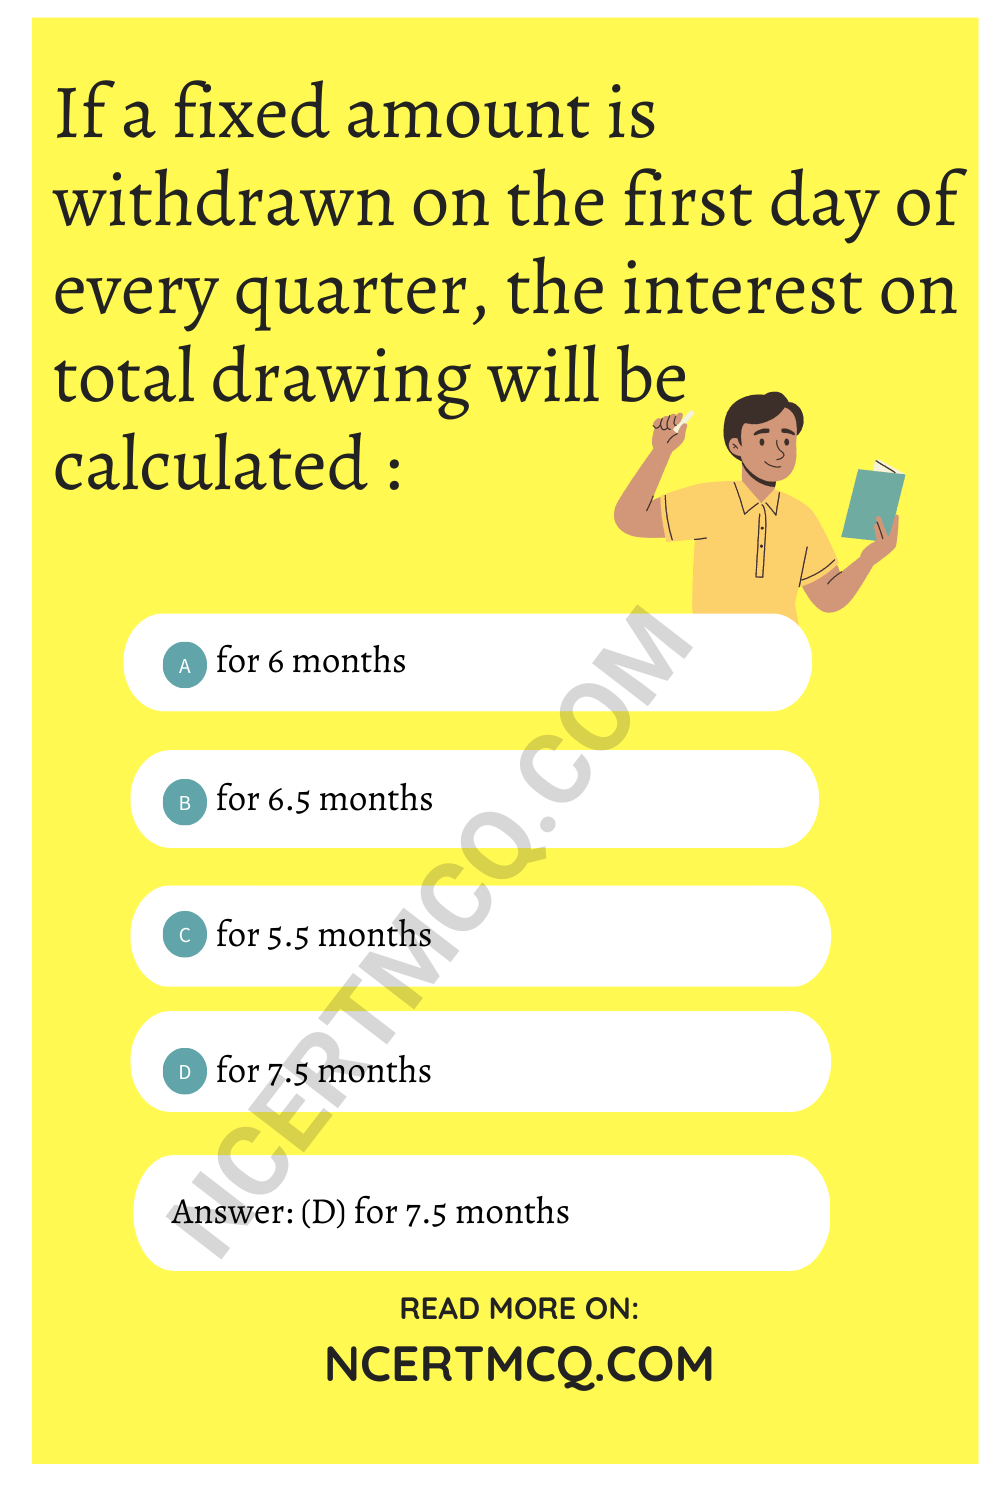 If a fixed amount is withdrawn on the first day of every quarter, the interest on total drawing will be calculated :